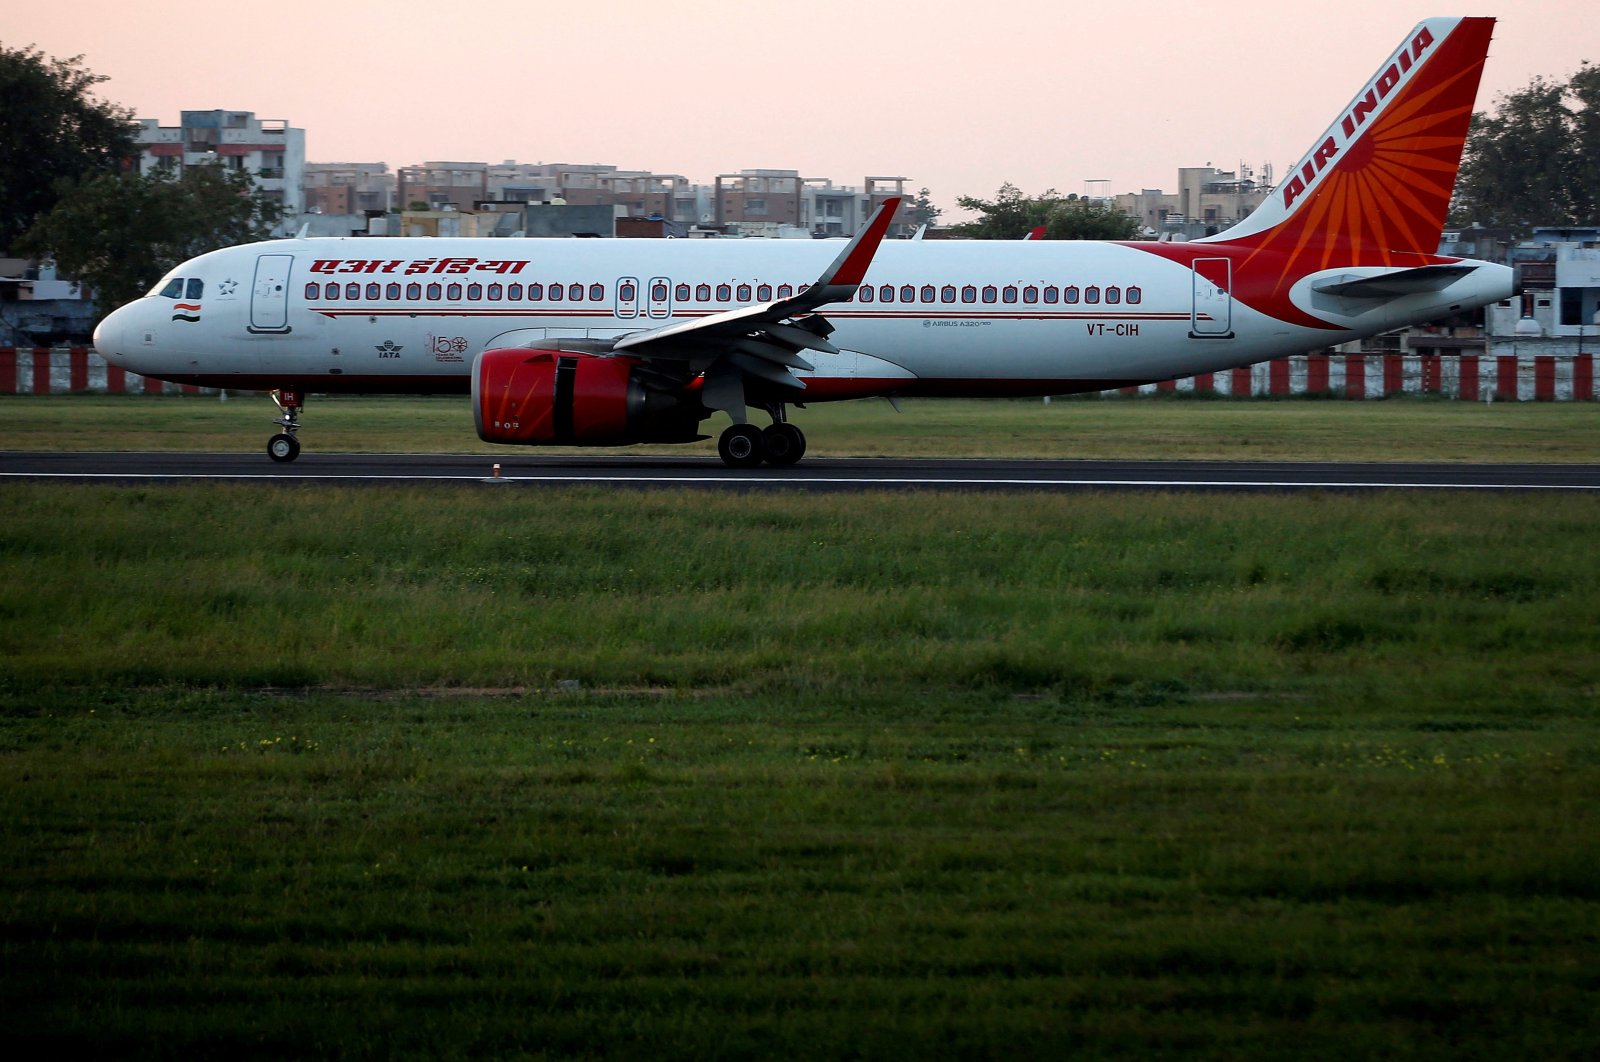 An Air India Airbus A320 neo passenger plane moves on the runway after landing at Sardar Vallabhbhai Patel International Airport, Ahmedabad, India, Oct. 22, 2021. (Reuters Photo)